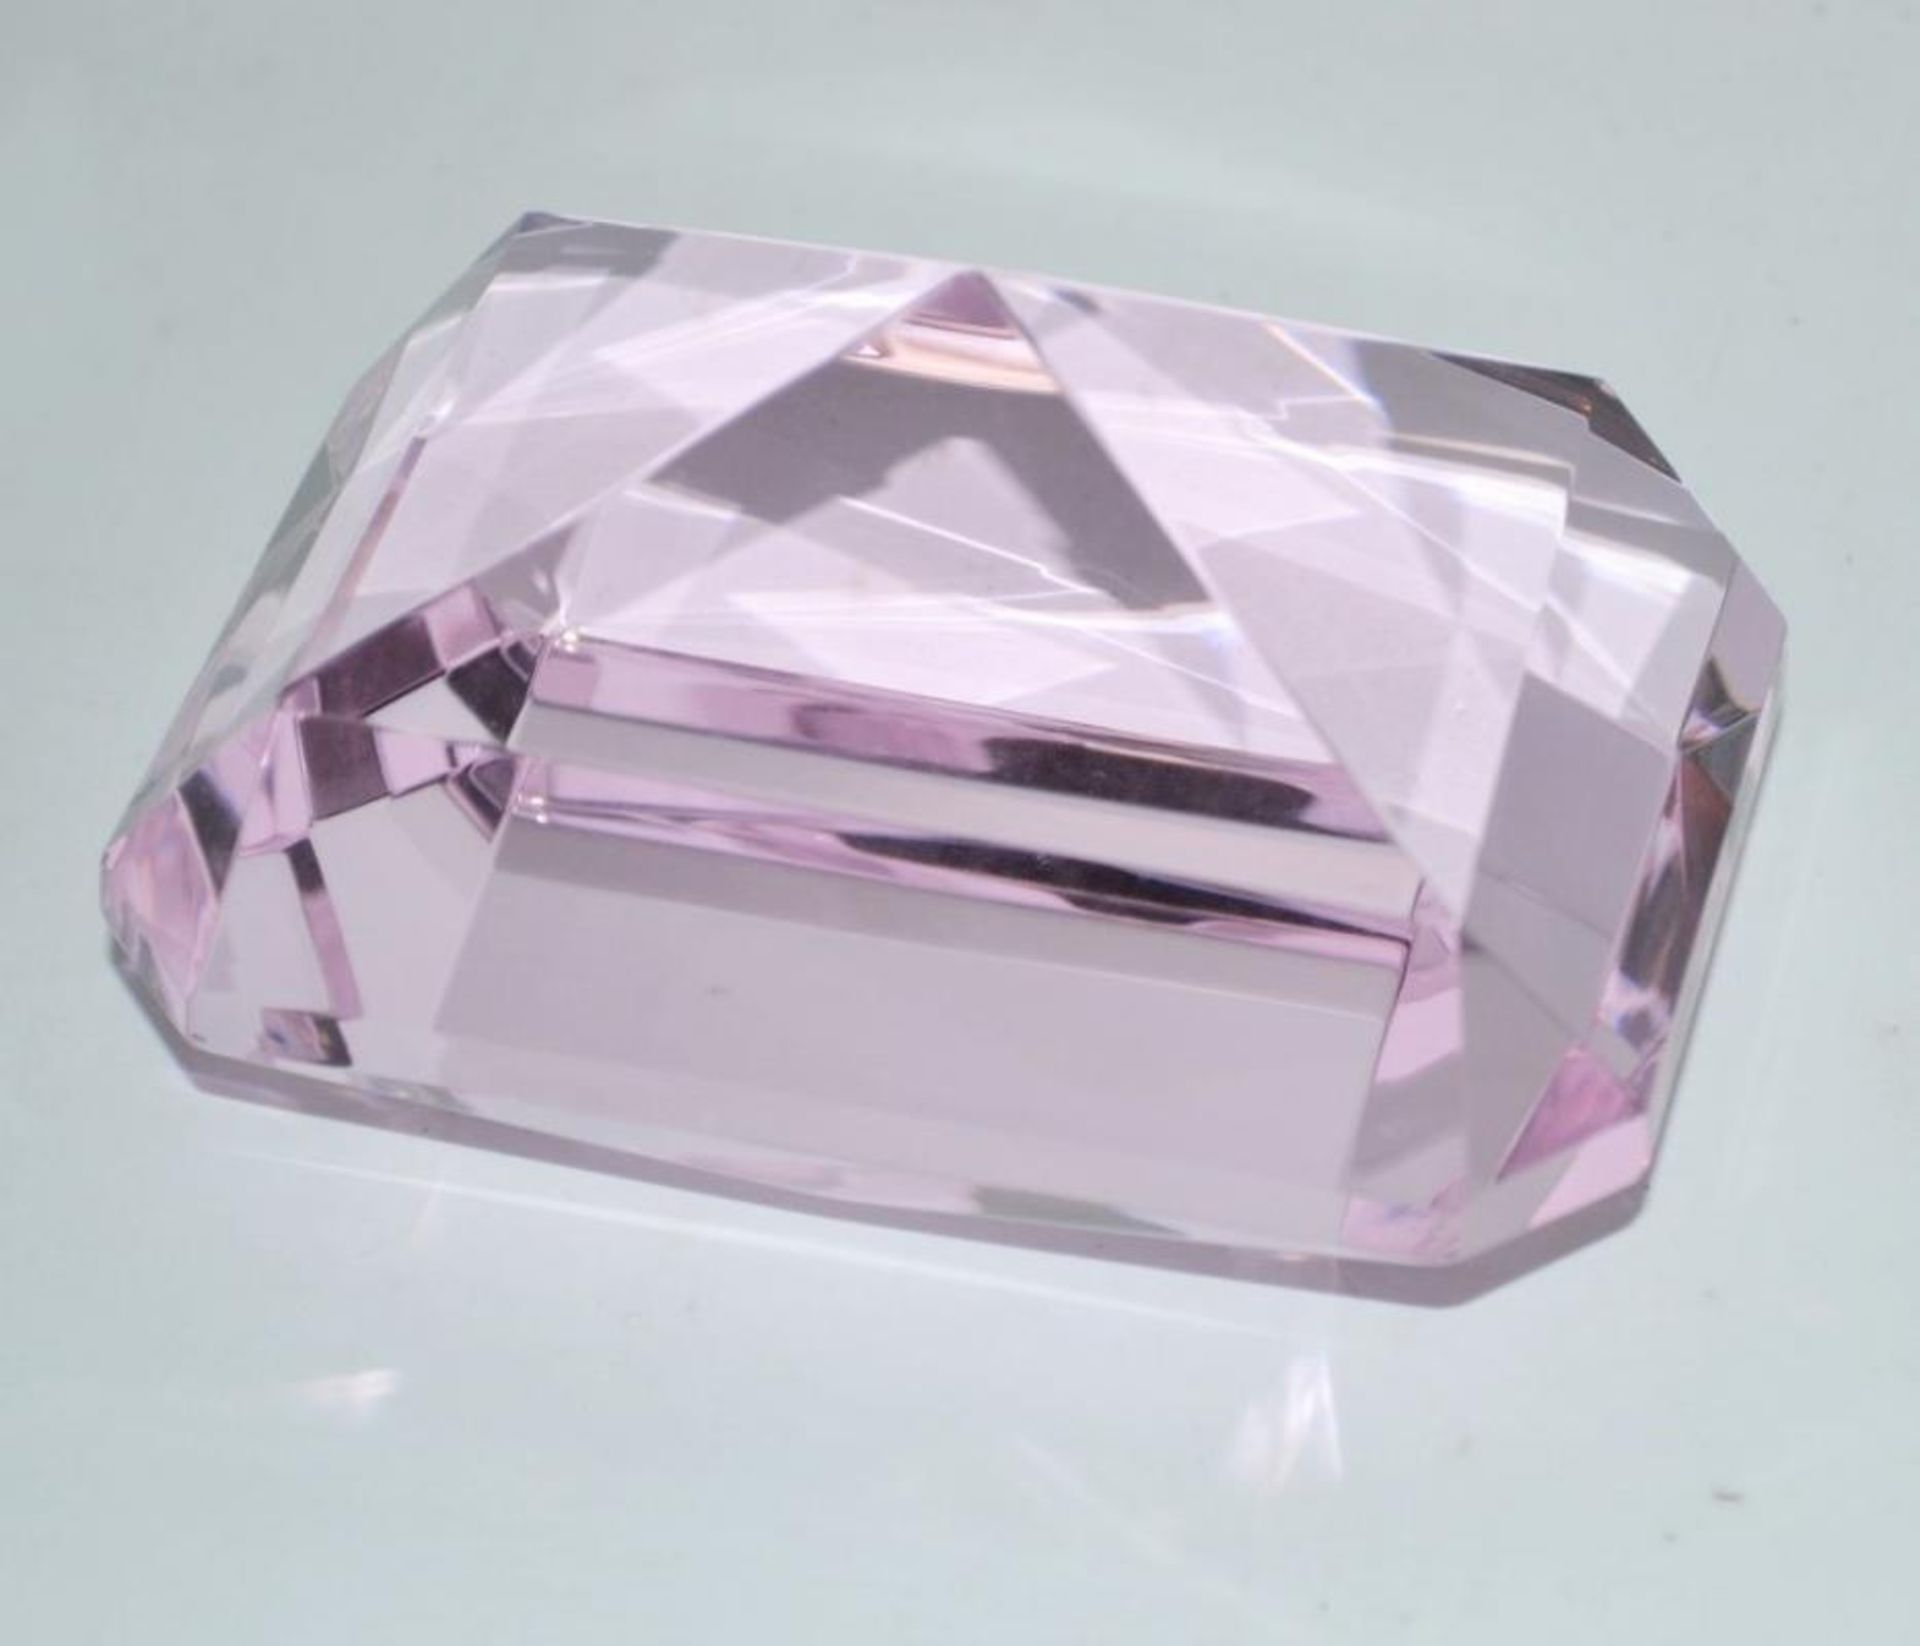 10 x ICE London Emerald Shaped Crystal Paperweight - Colour: Pink - 100mm In Diameter - New / Unused - Image 4 of 4